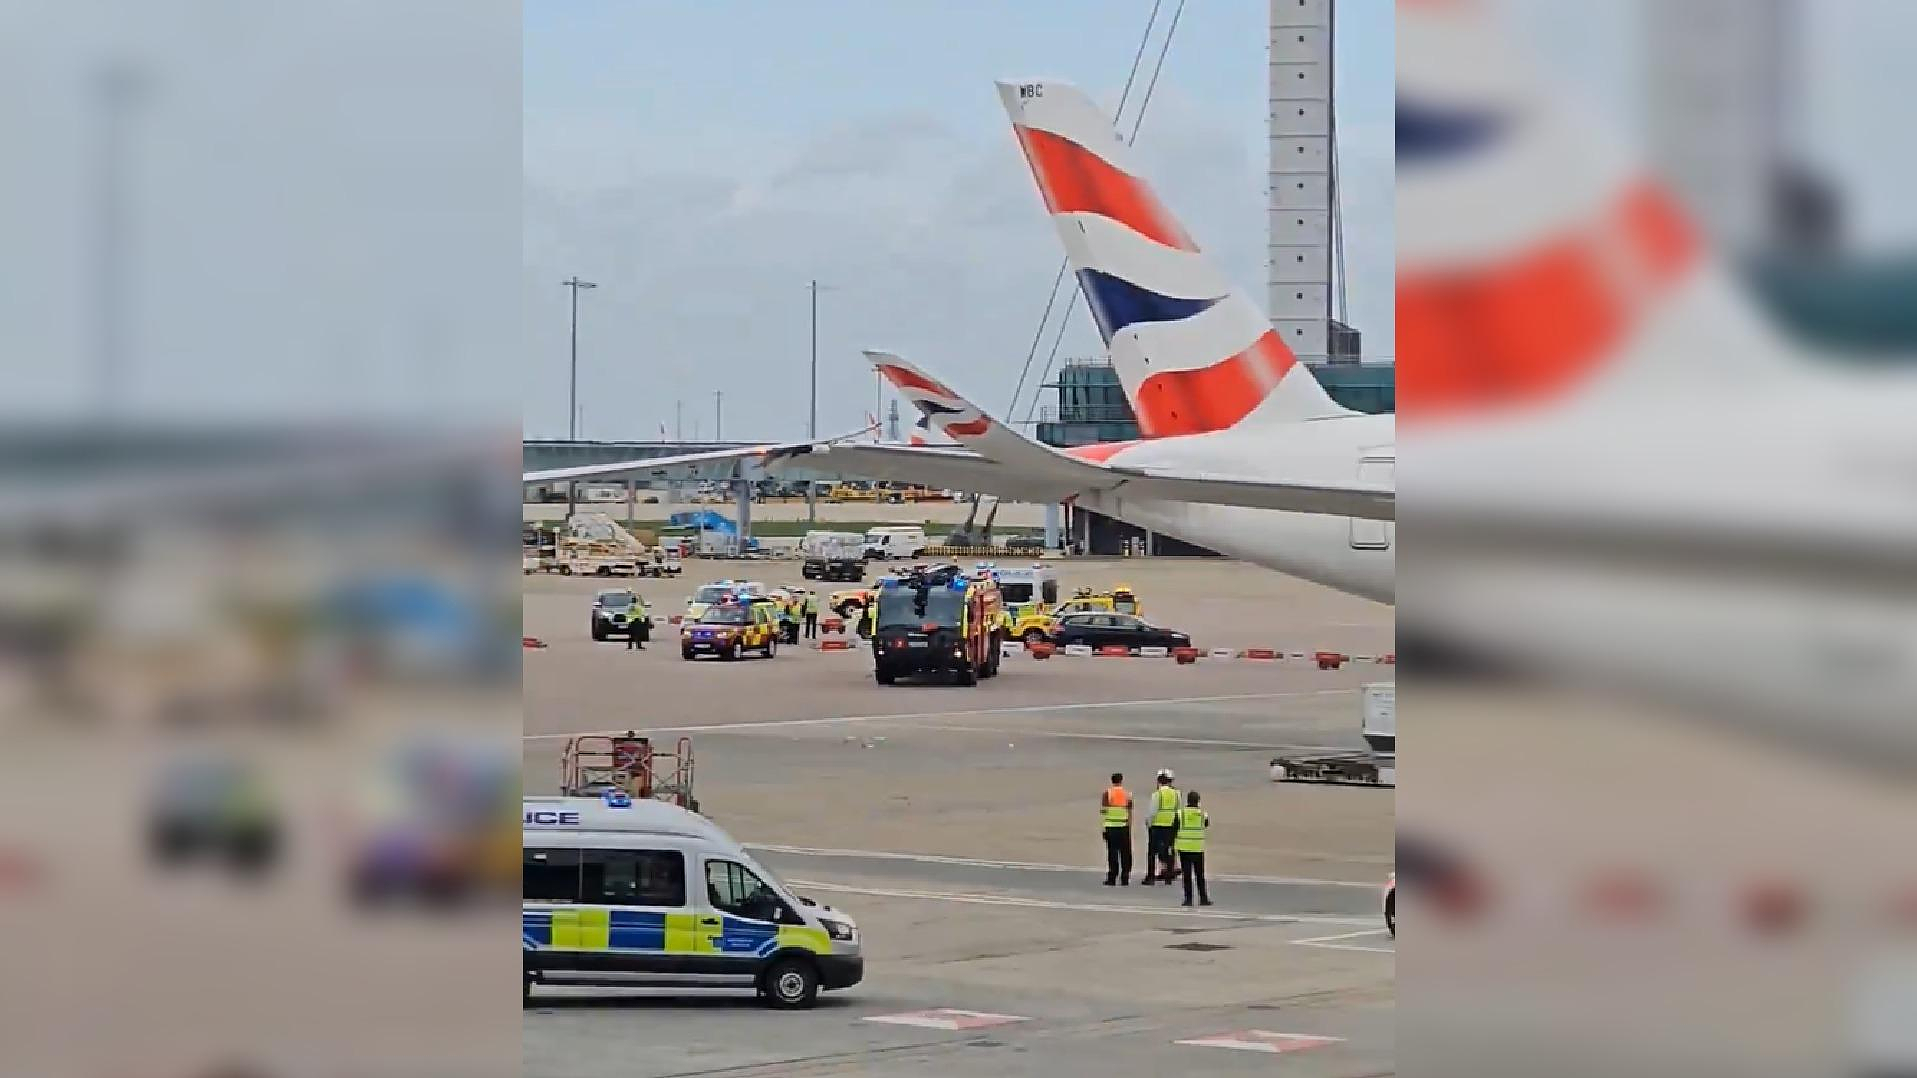 London: collision between two planes on the tarmac at Heathrow airport